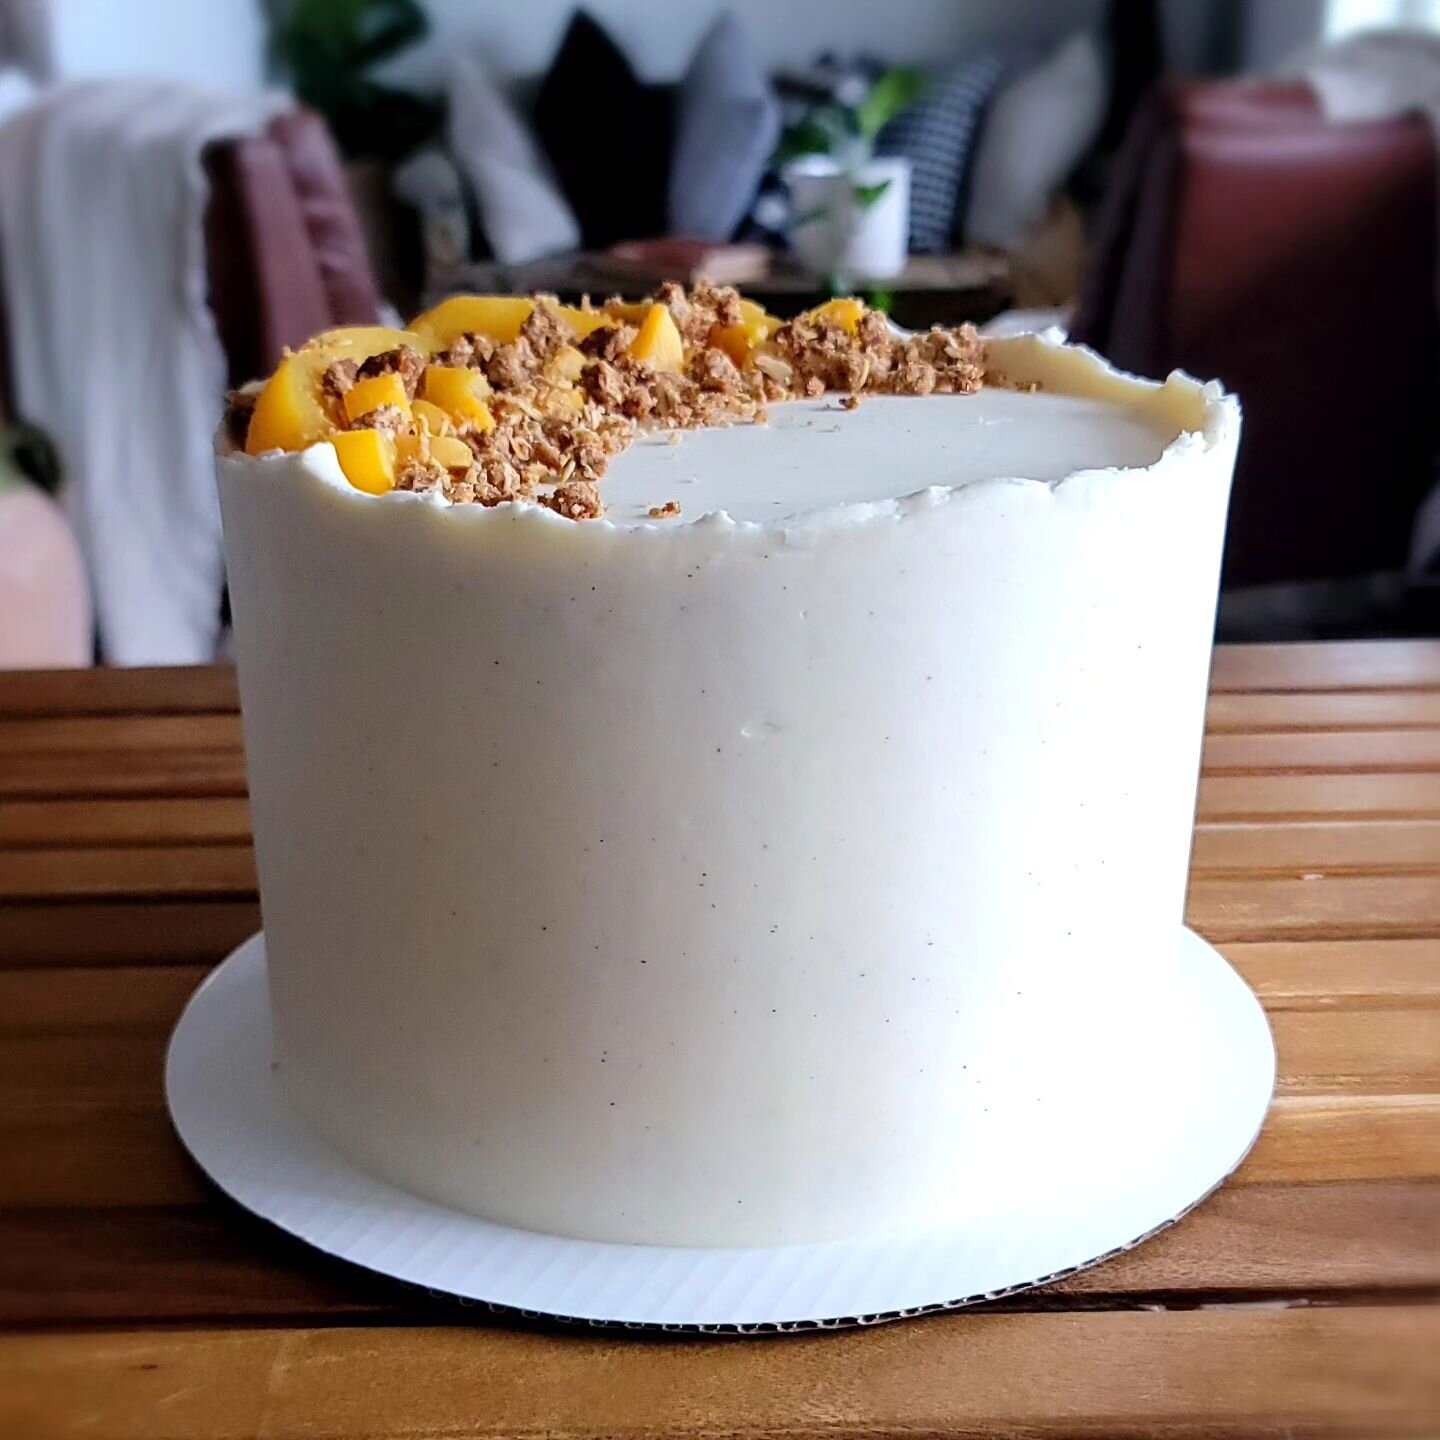 🍑Peach Crumble Crisp Cake 🍑 

Delicious tender yellow cake layers, filled with a Freah Peach Compote, a Cinnamon Oat Crumble, and covered in a Whipped Vanilla Bean Buttercream! 

#peachcake #peachcompote #crumblecake #peachcrisp #vanillabean #peach